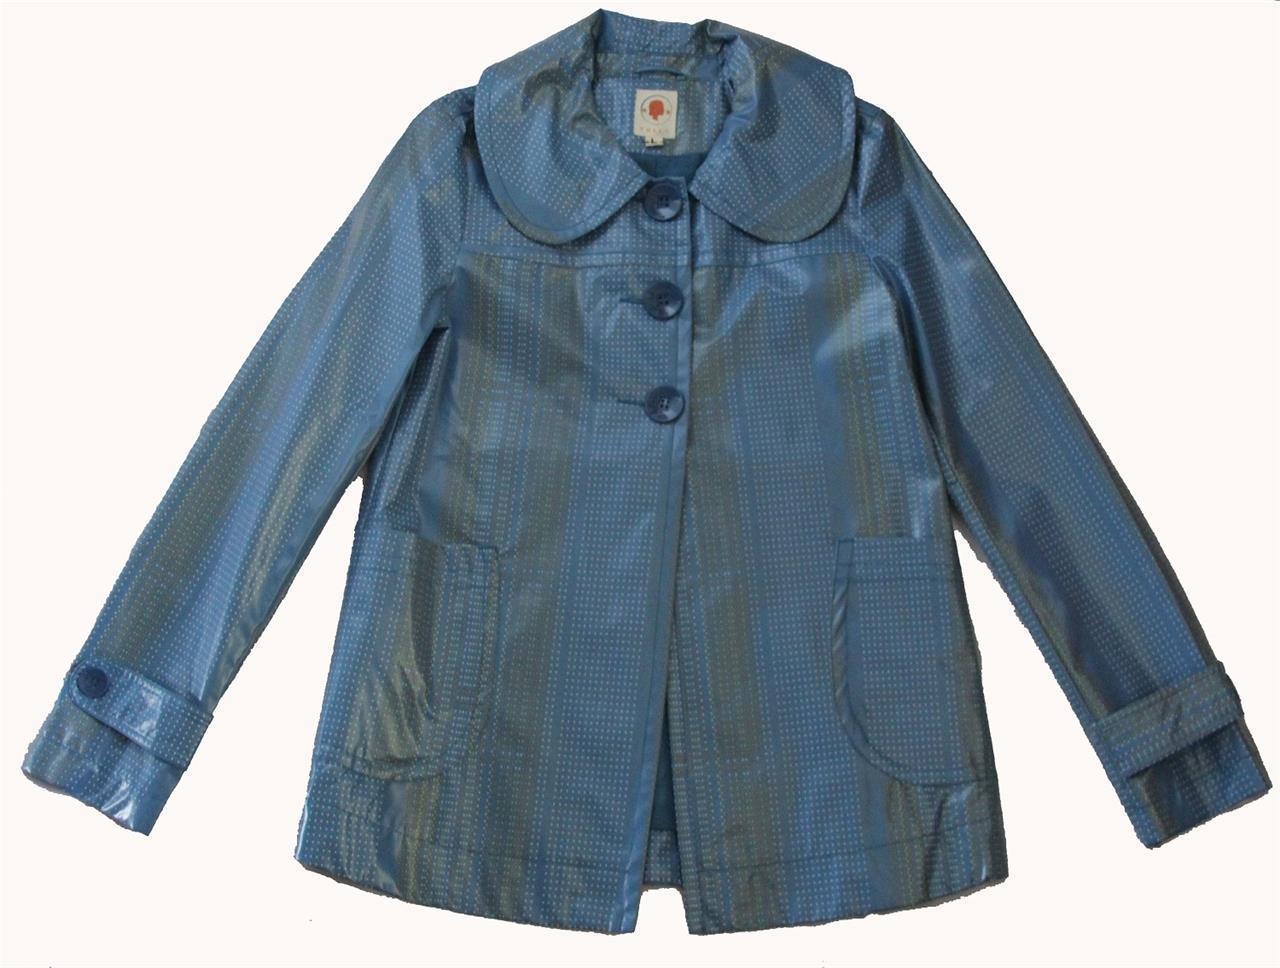 TULLE Anthropologie Blue Lined Polka Dots Swing Nylon/PU Raincoat NEW Wms L - $68.99